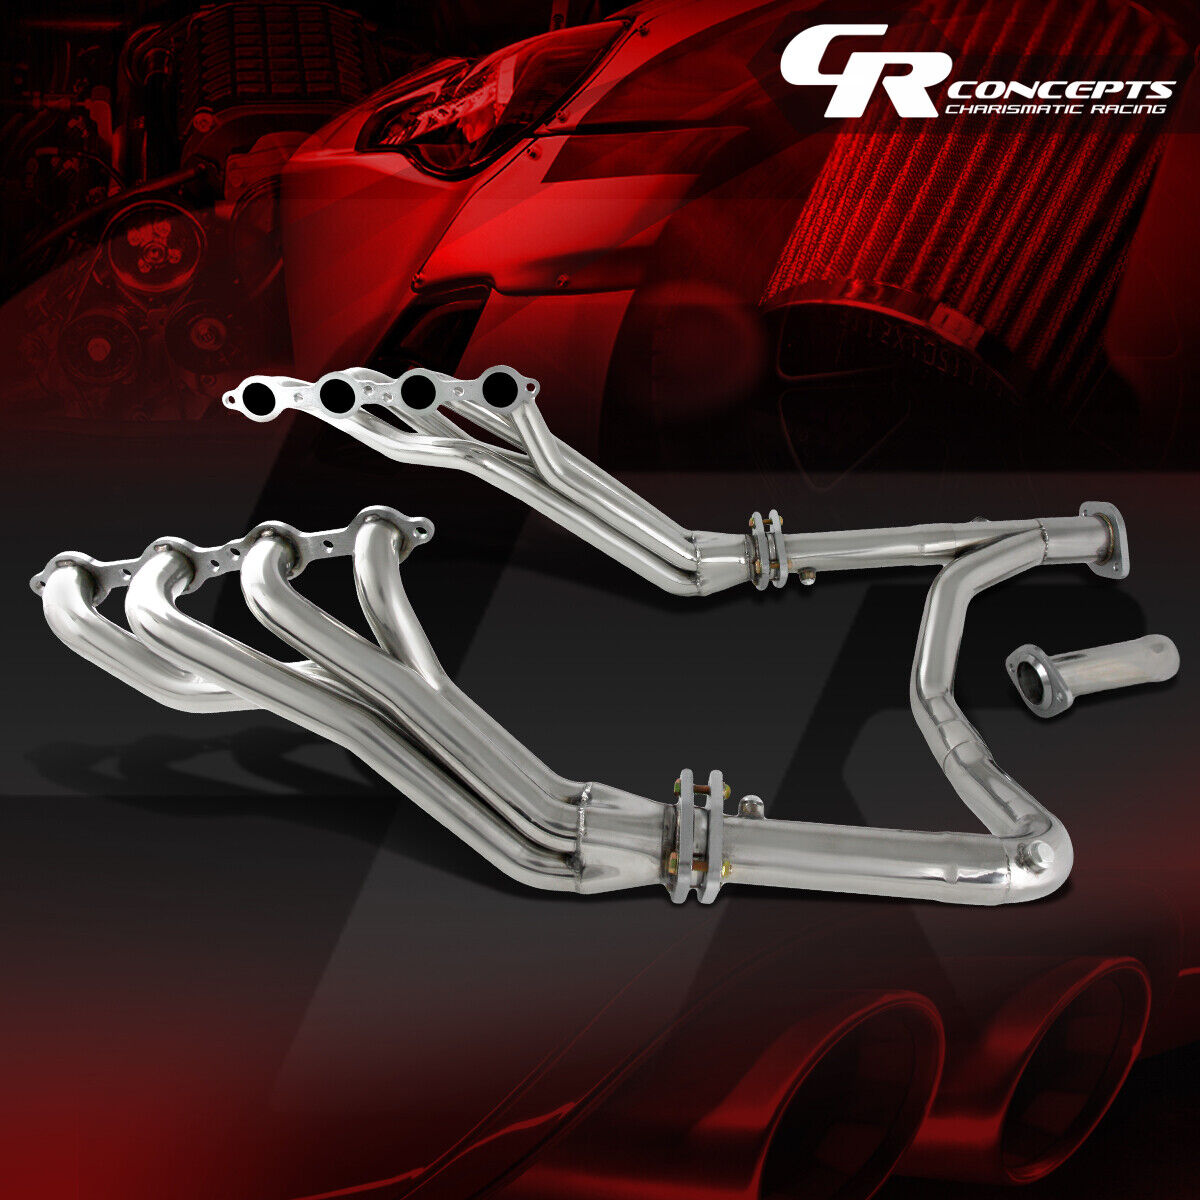 FOR 07-13 GMT900 AVALANCHE/SILVERADO 4.8/5.3/6.0 STAINLESS EXHAUST HEADER+Y-PIPE